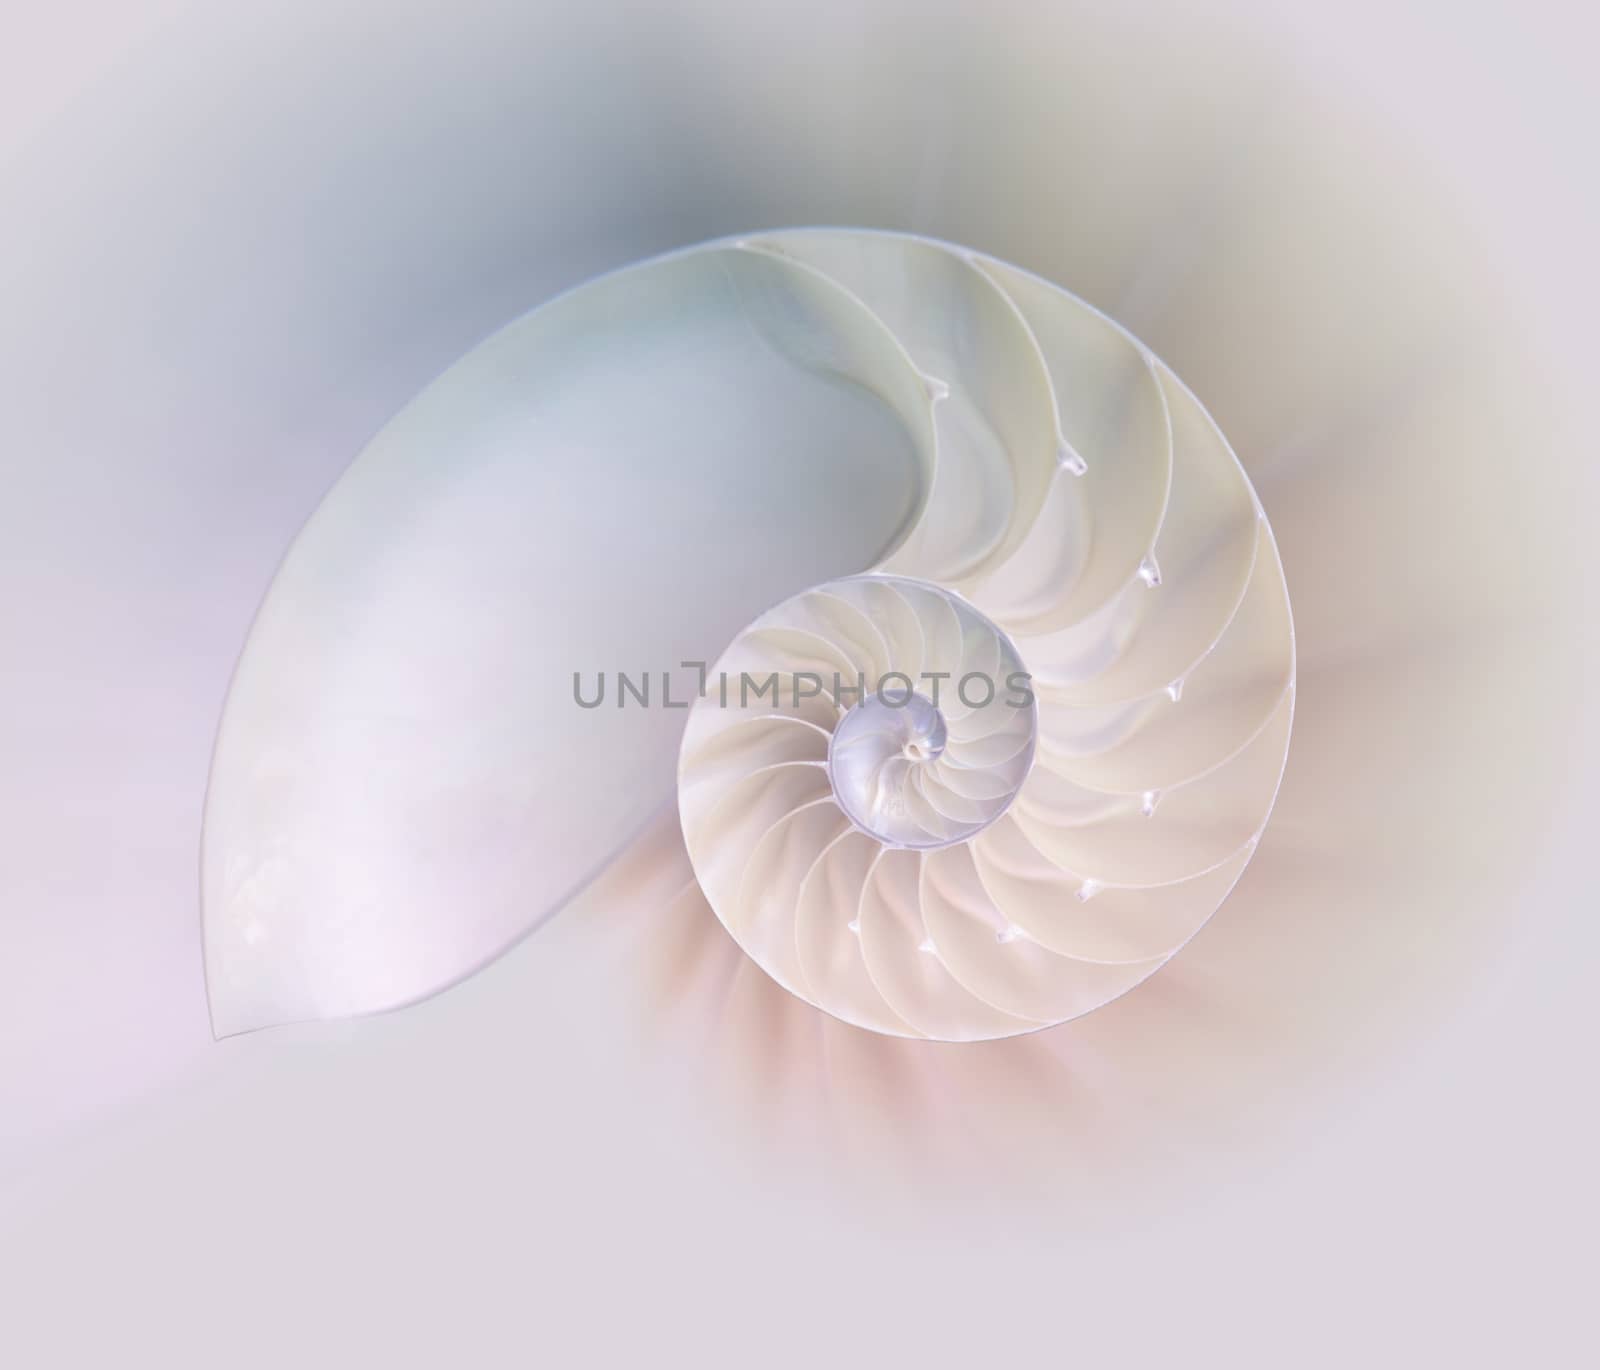 Chambered Nautilus cutaway Shells on colorful background